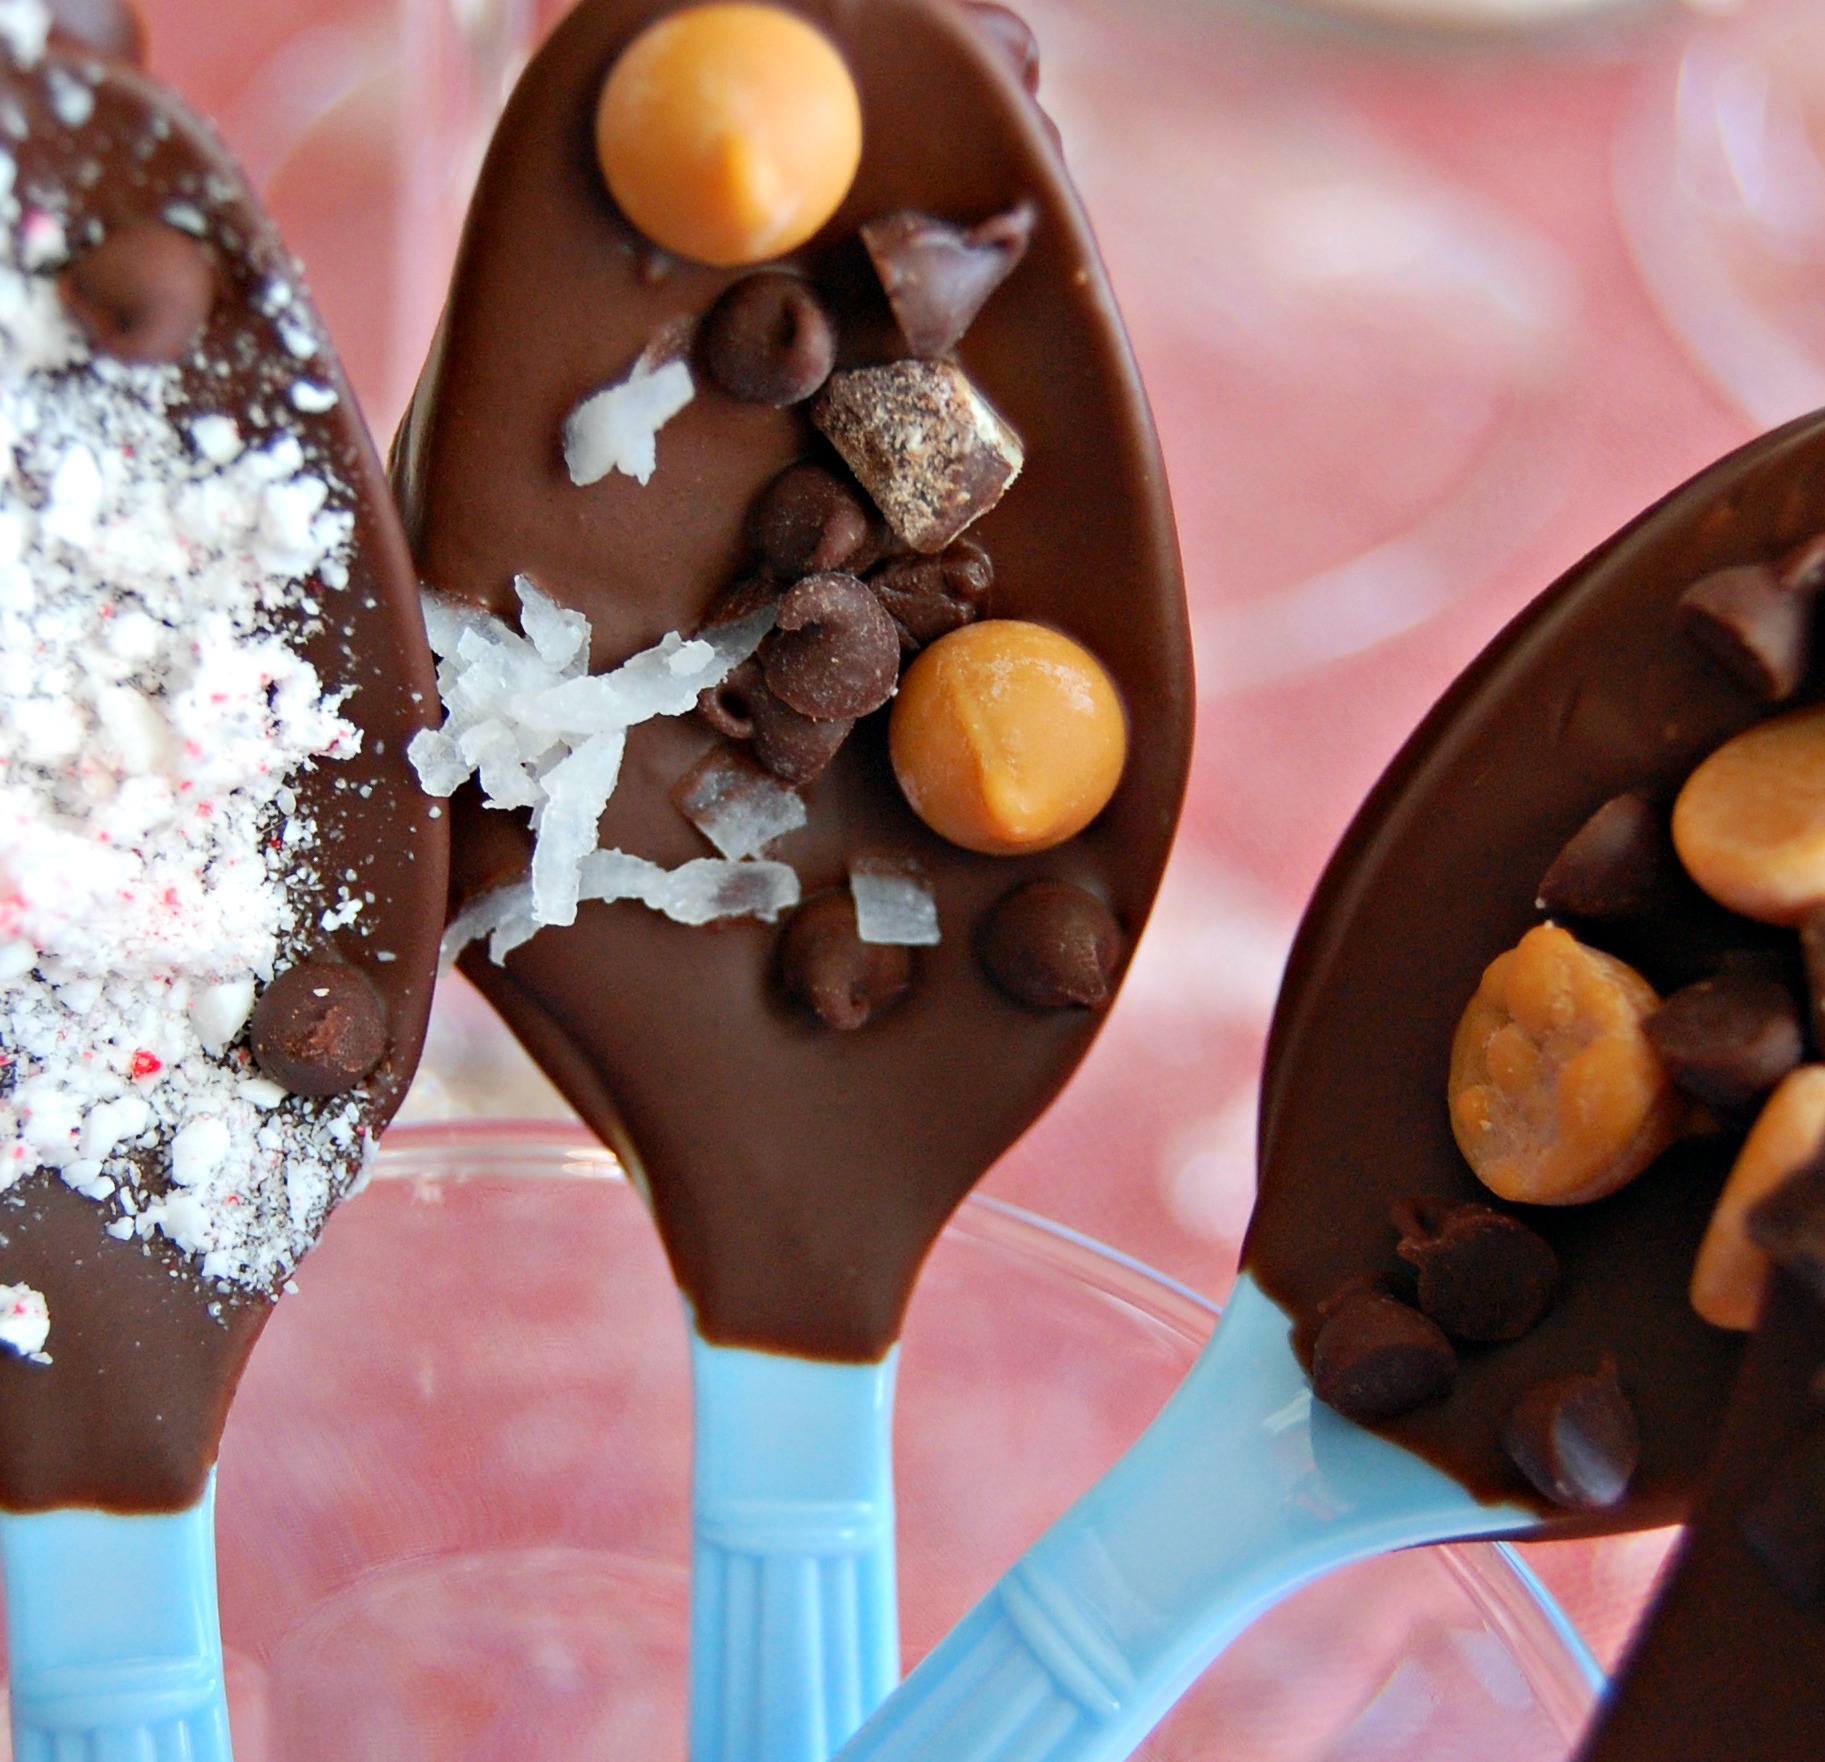 Hot Chocolate Stirrers Recipe - A Winter Drink Must Have!